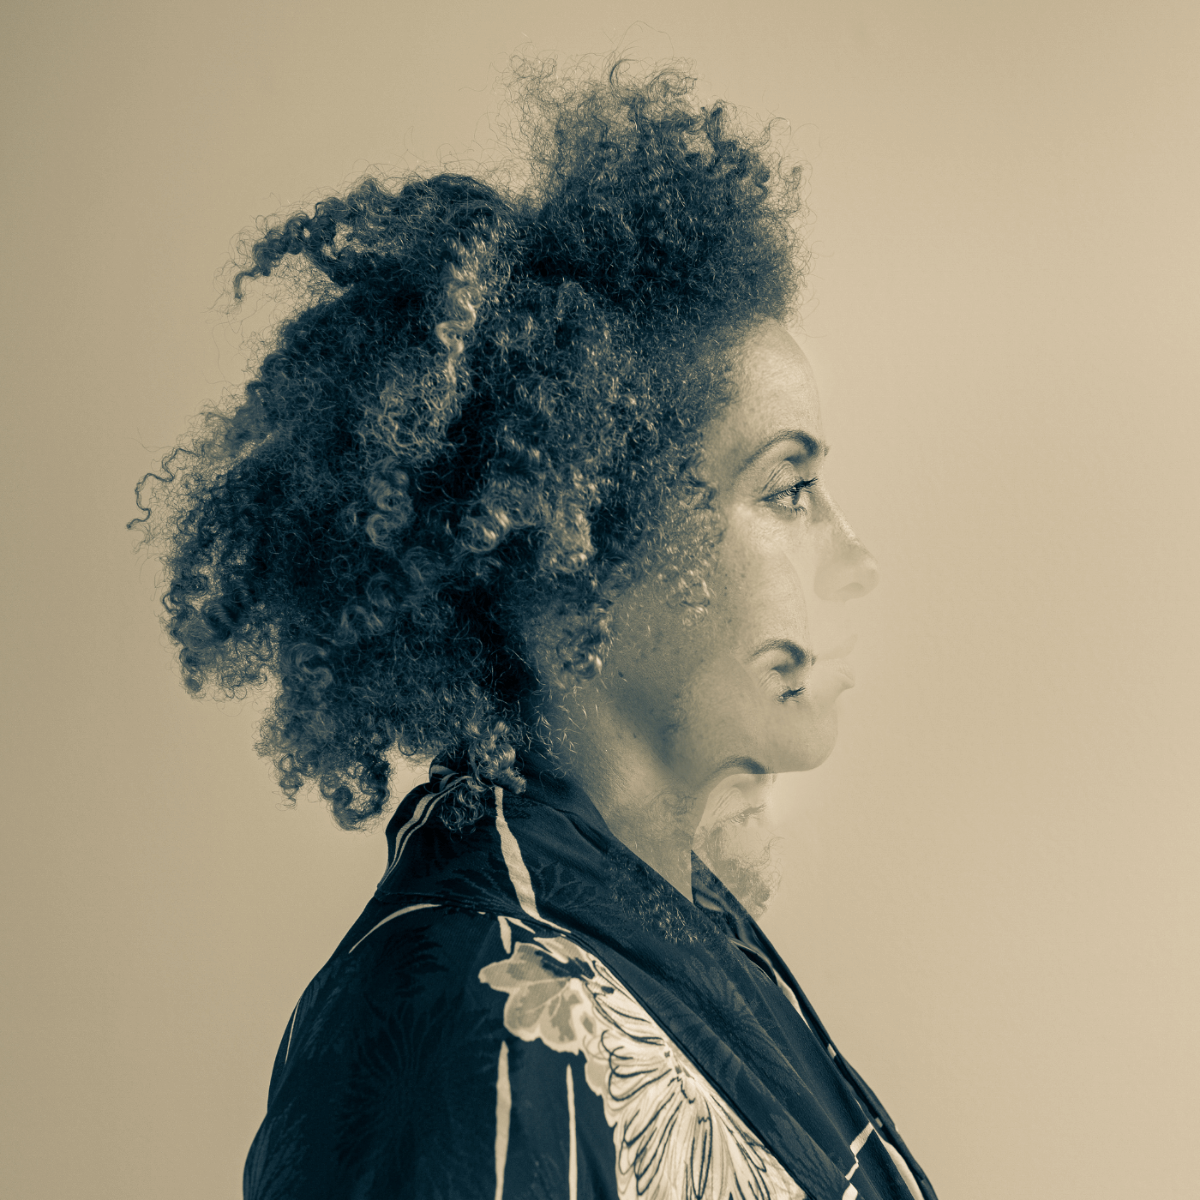 "Hunt" By Martina Topley-Bird is Northern Transmissions Song of the Day. The track is of the artist's forthcoming release Pure Heart